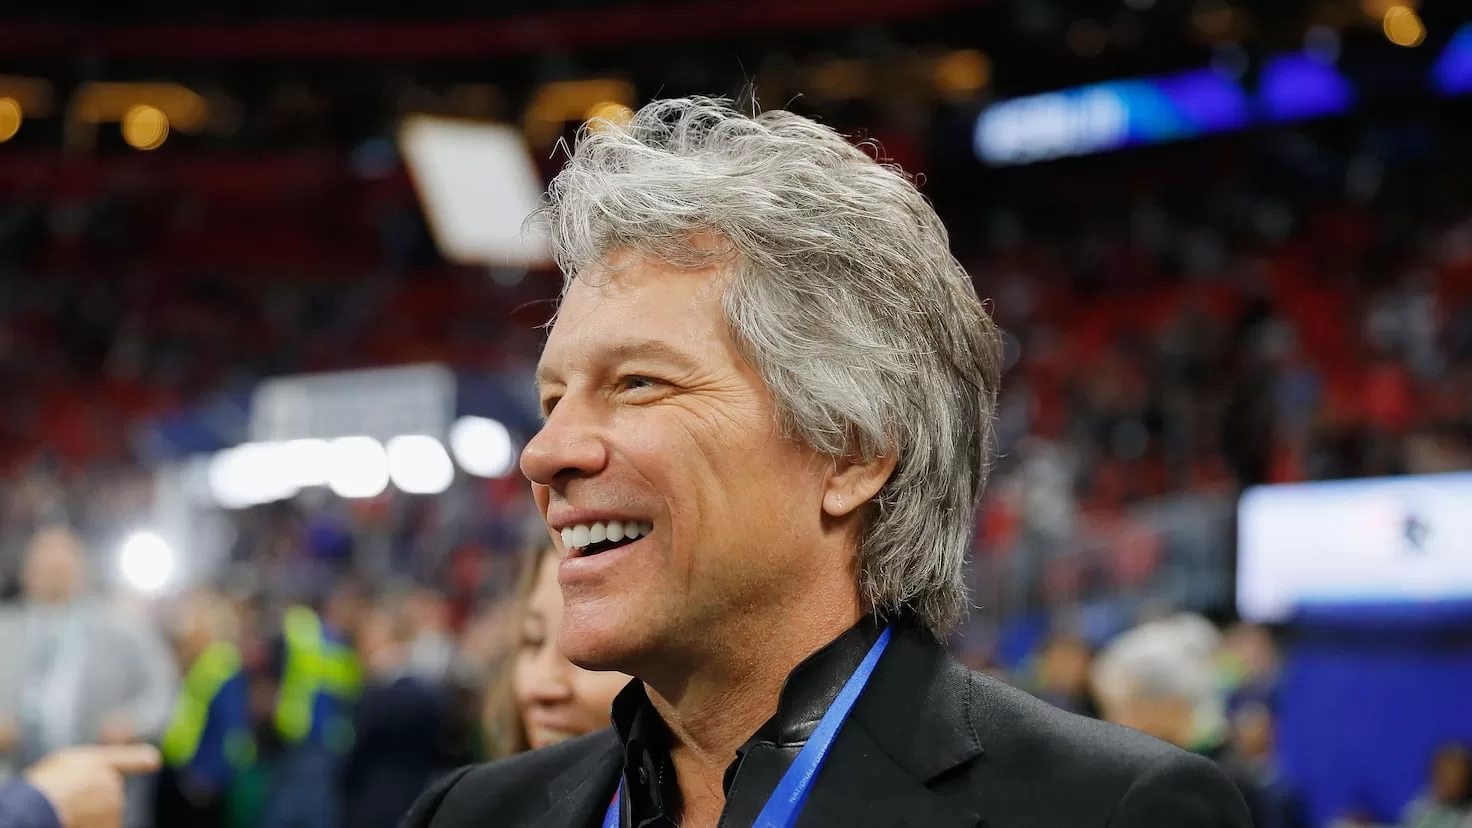 Jon Bon Jovi, on his vocal cord surgery: At this point, everything depends on God
